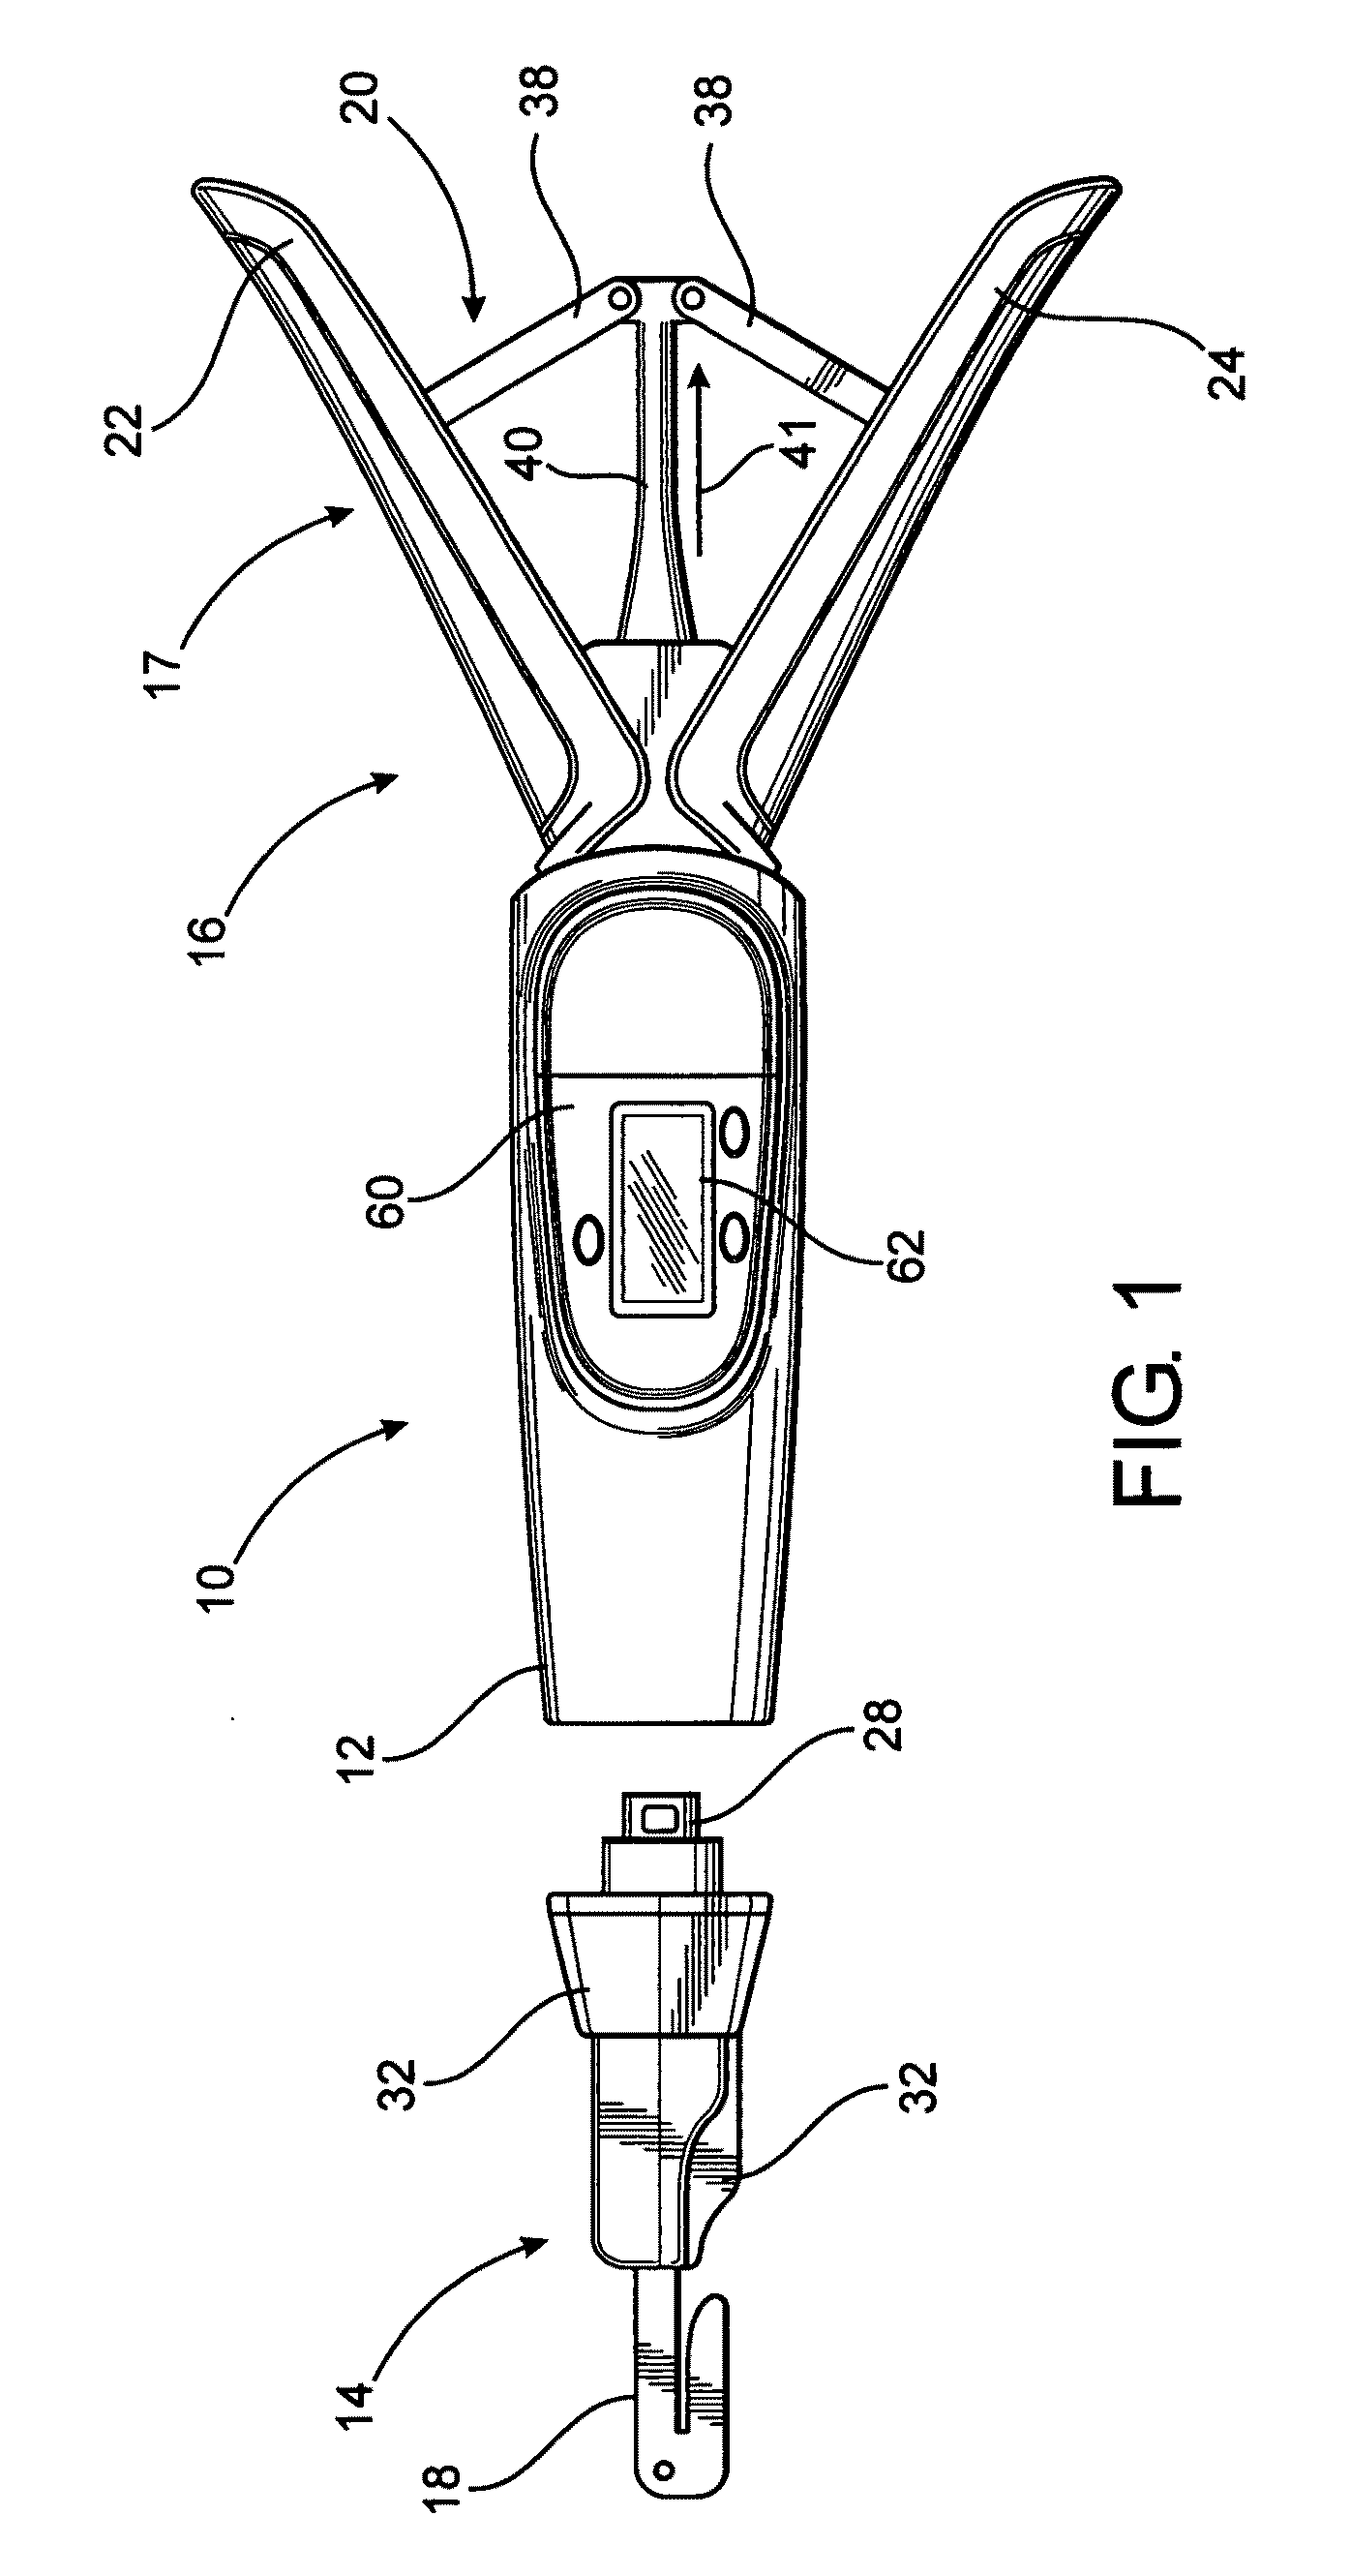 Hair measuring assembly and single use cartridge